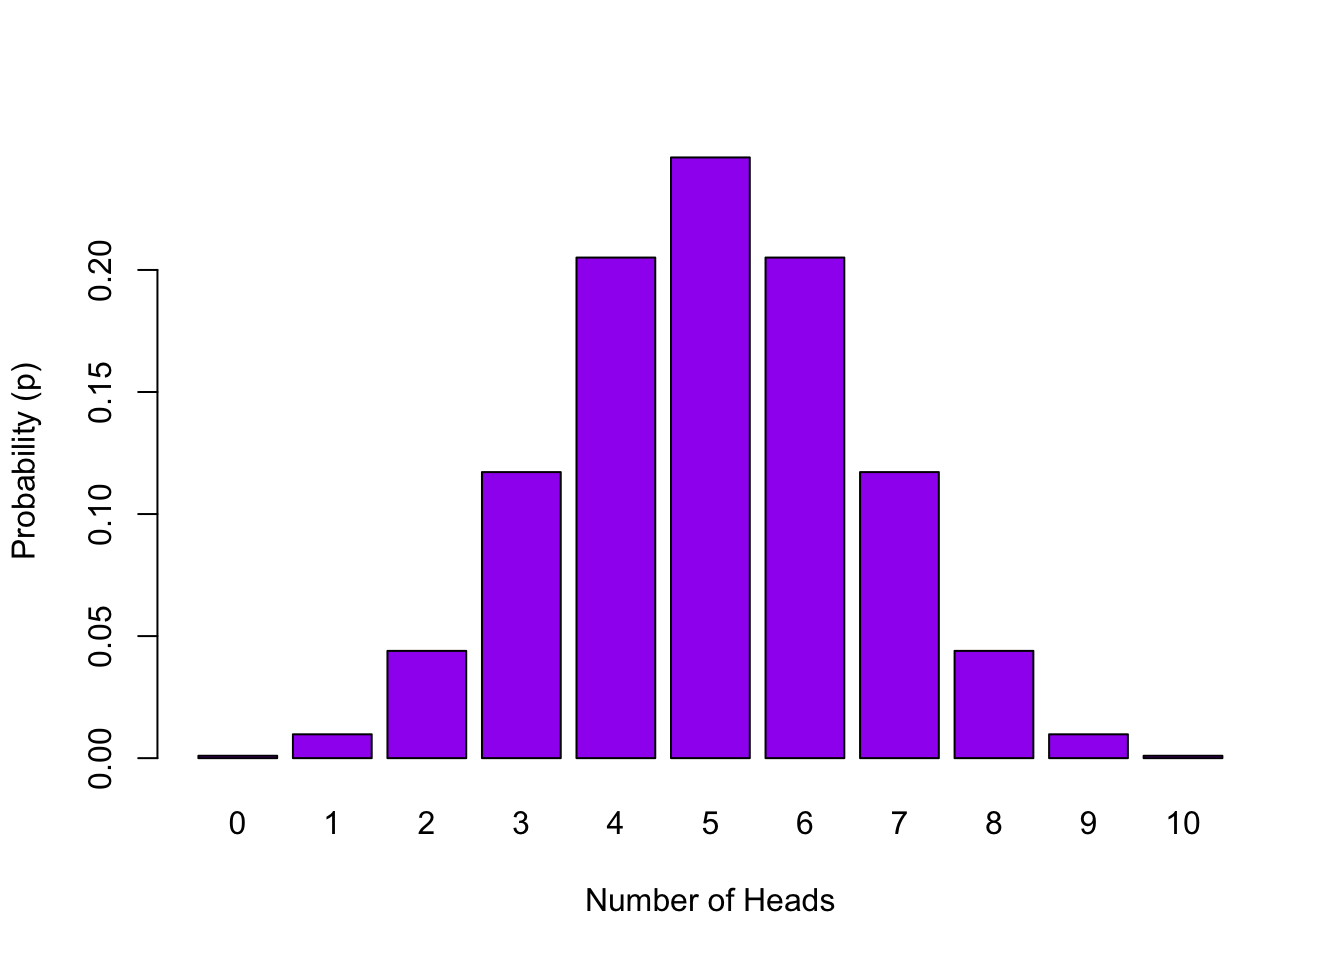 Probability Distribution of Number of Heads in 10 Flips